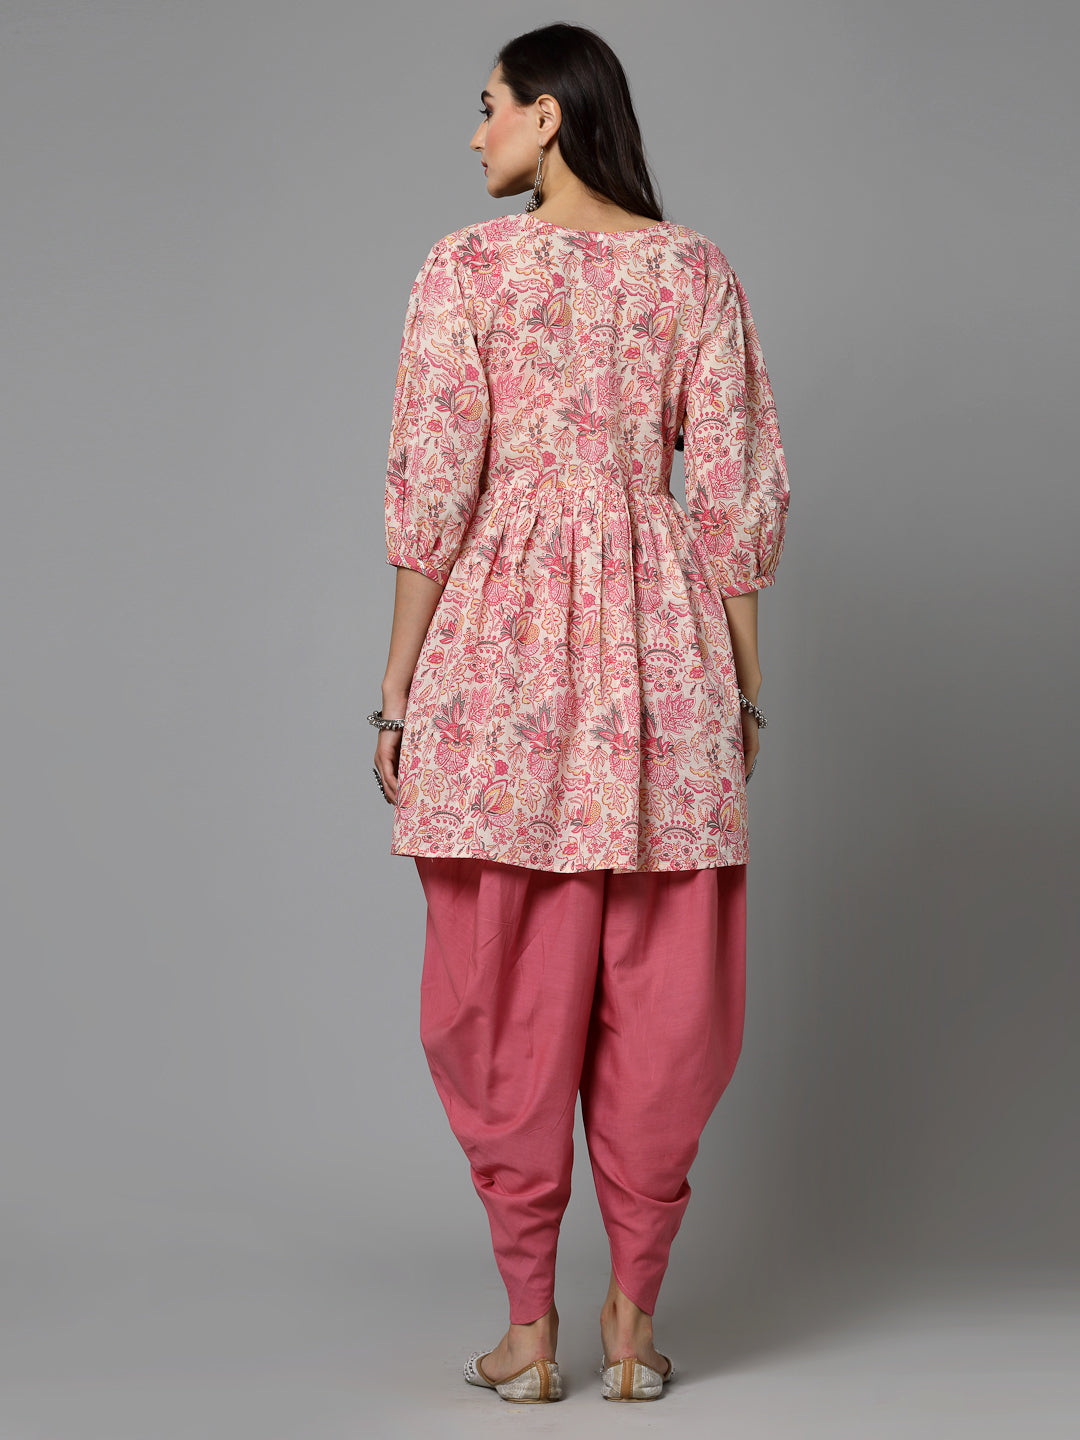 Unique Indo Western Dhoti Style Kurti at Rs.8999/Piece in jaipur offer by  Wellforia Private Limited